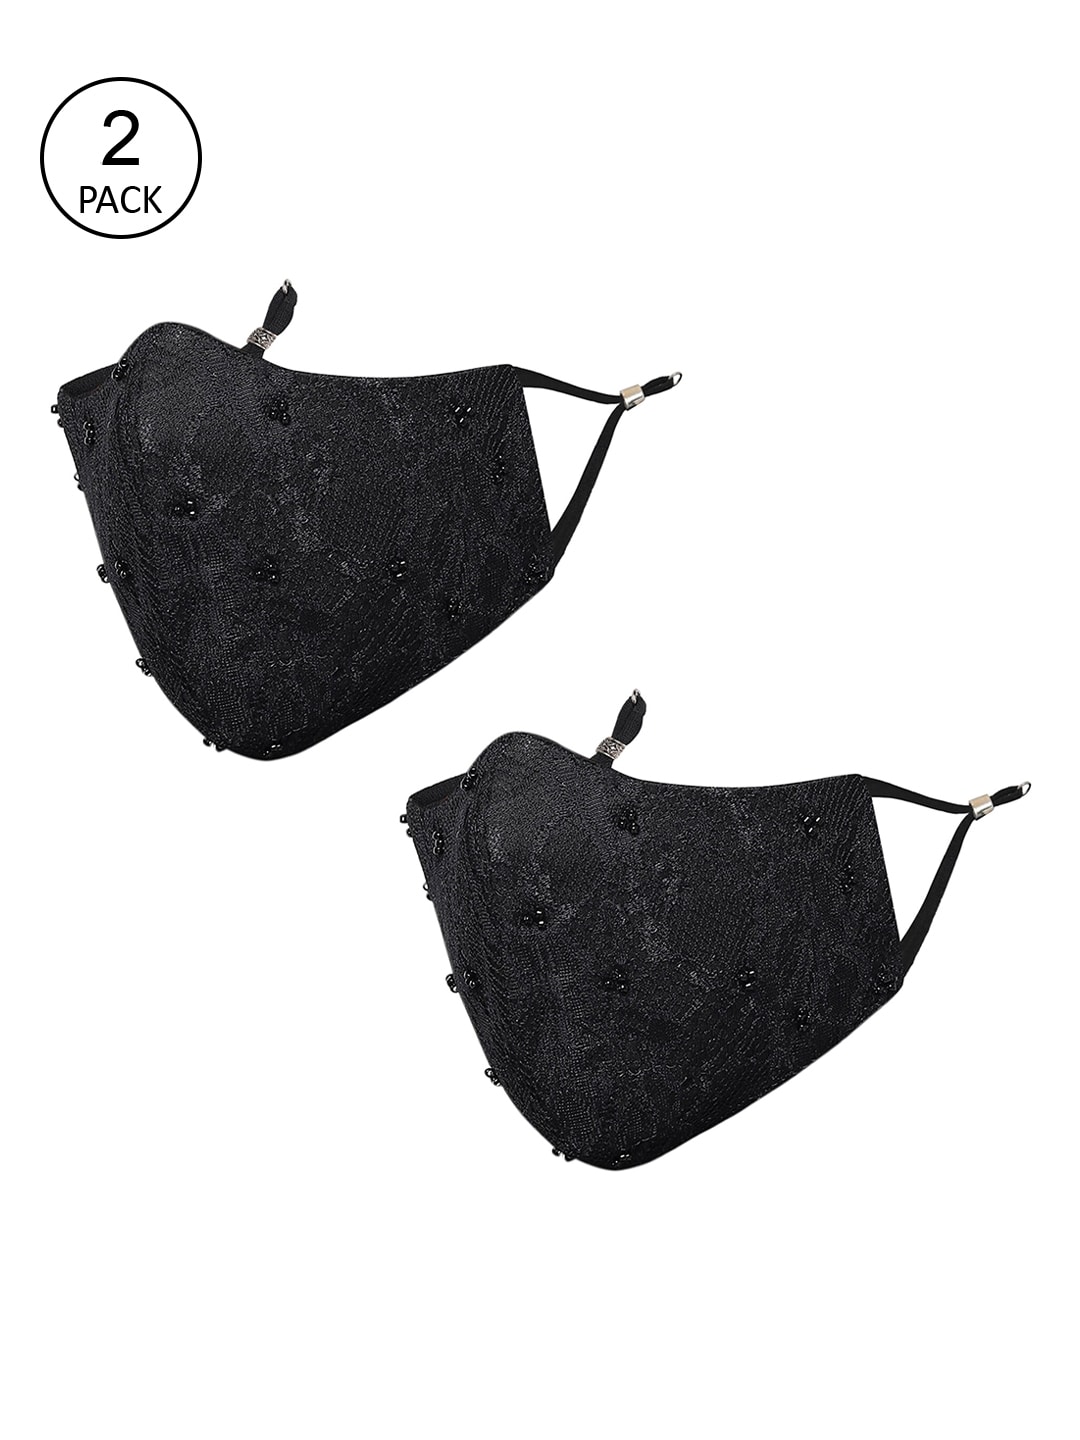 MASQ Pack of 2 Black Woven Design 4-Ply Reusable Cloth Masks with Beaded Detail Price in India